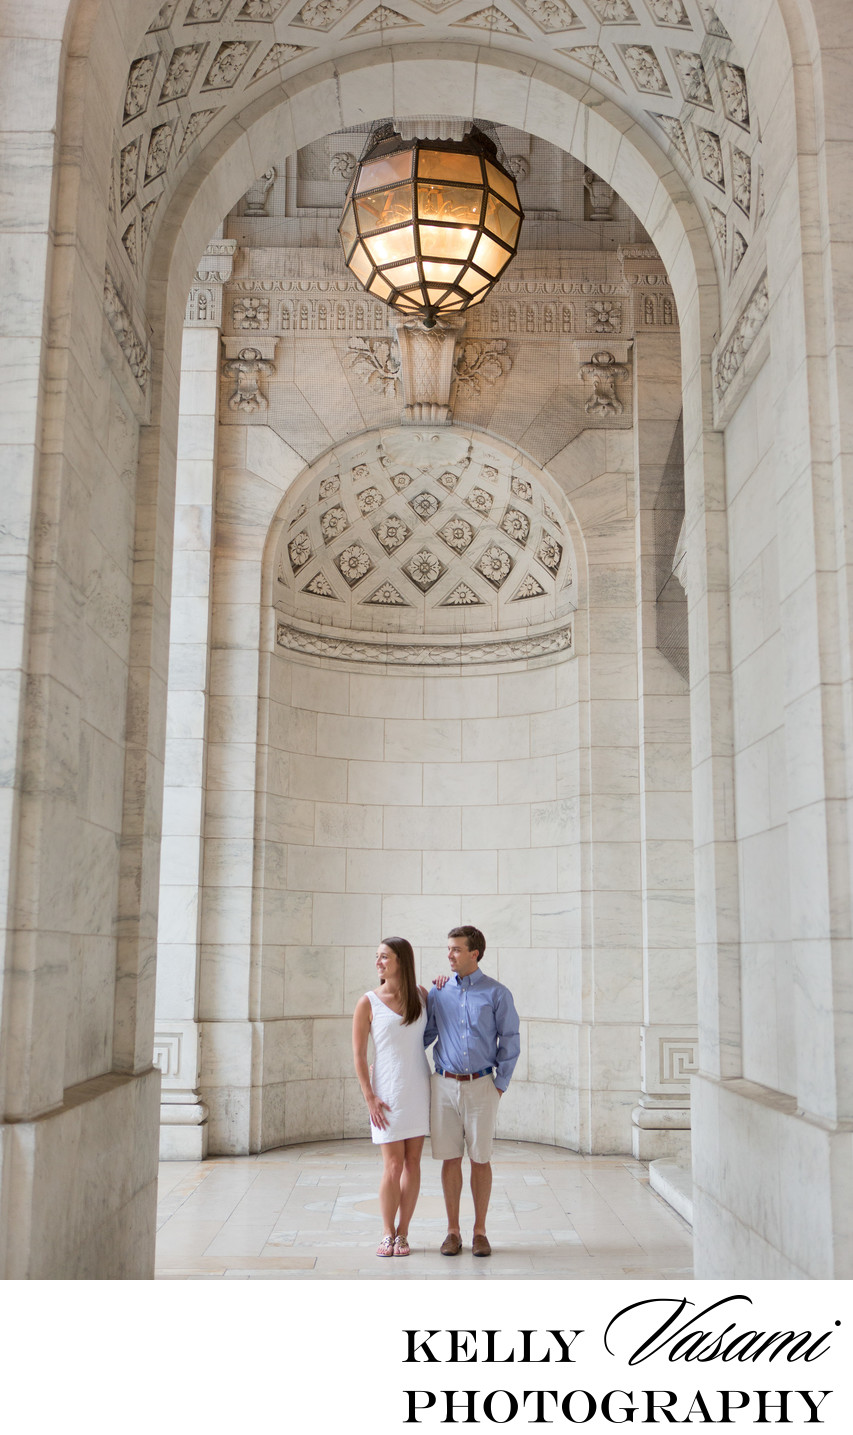 NY Public Library is this couple's dramatic backdrop